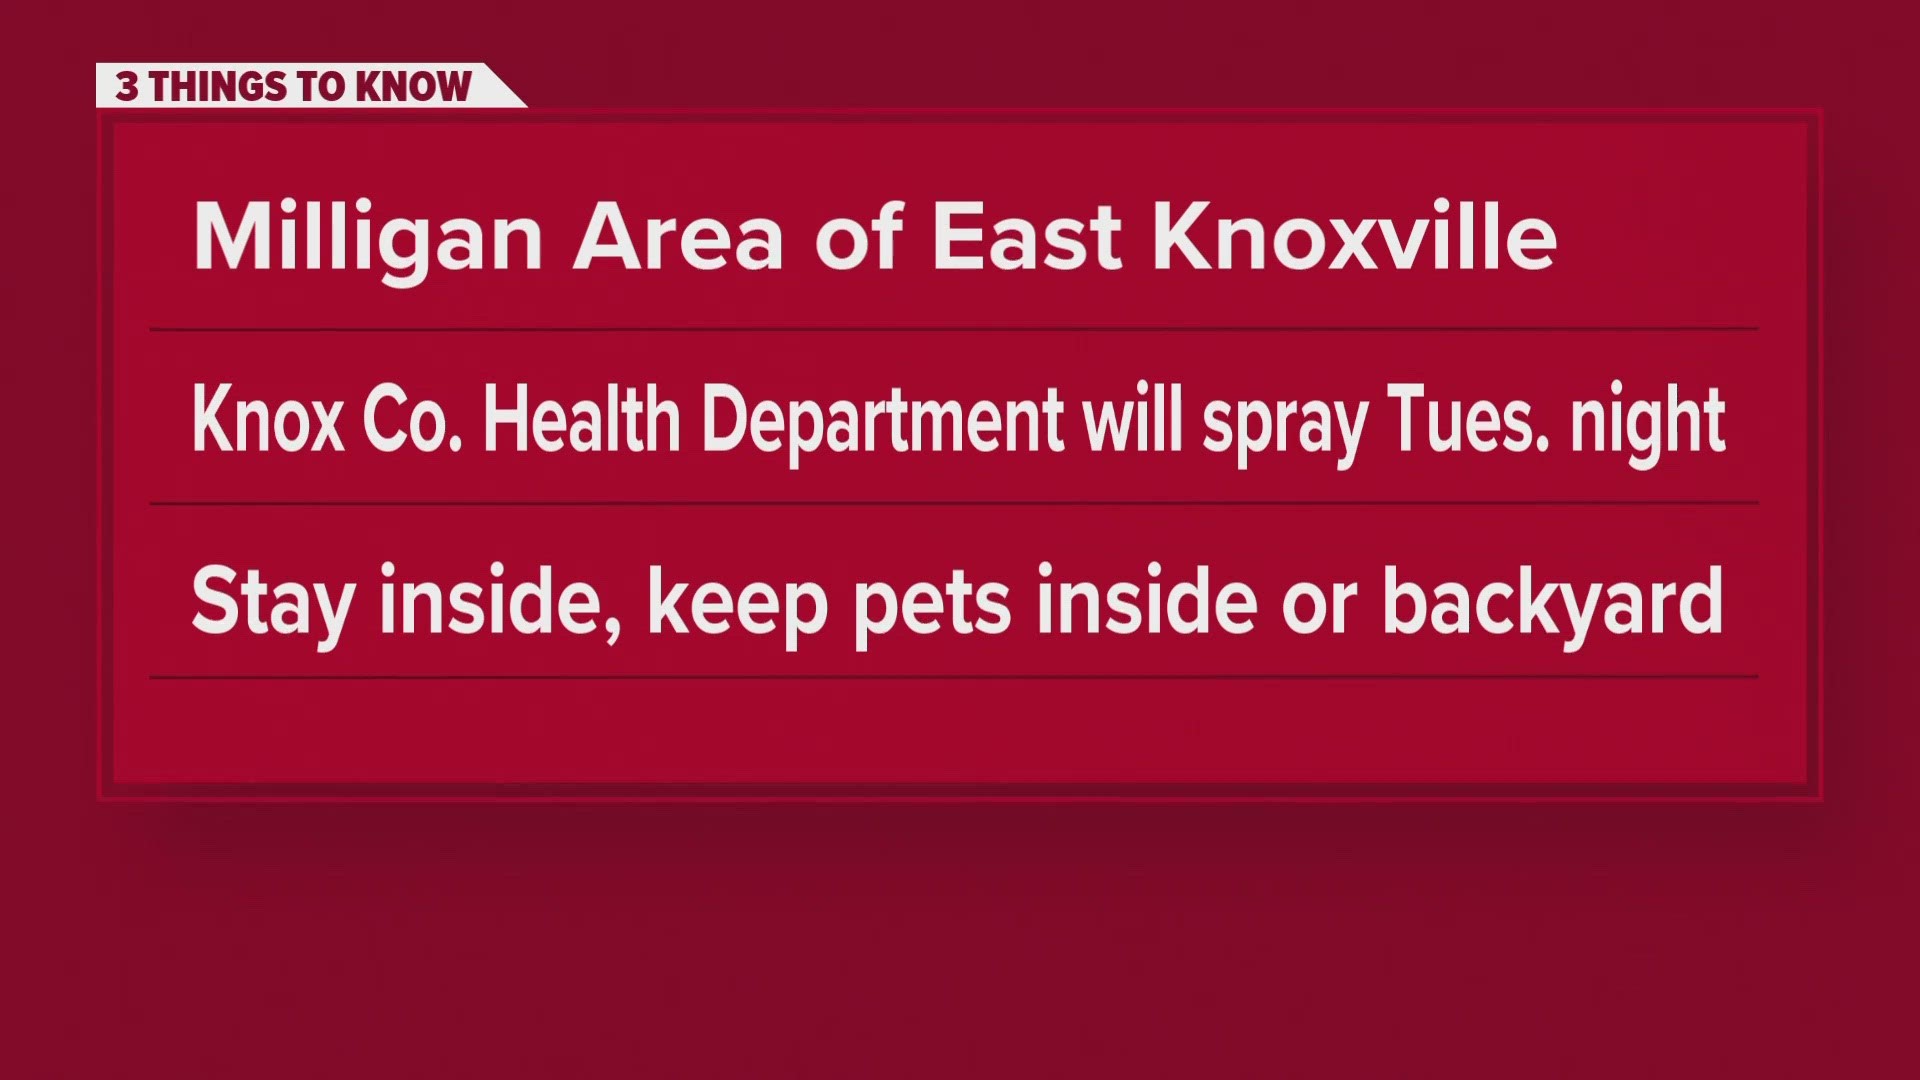 The health department will spray for mosquitoes in the area Tuesday, Aug. 15 from 8 p.m. to 2 a.m.